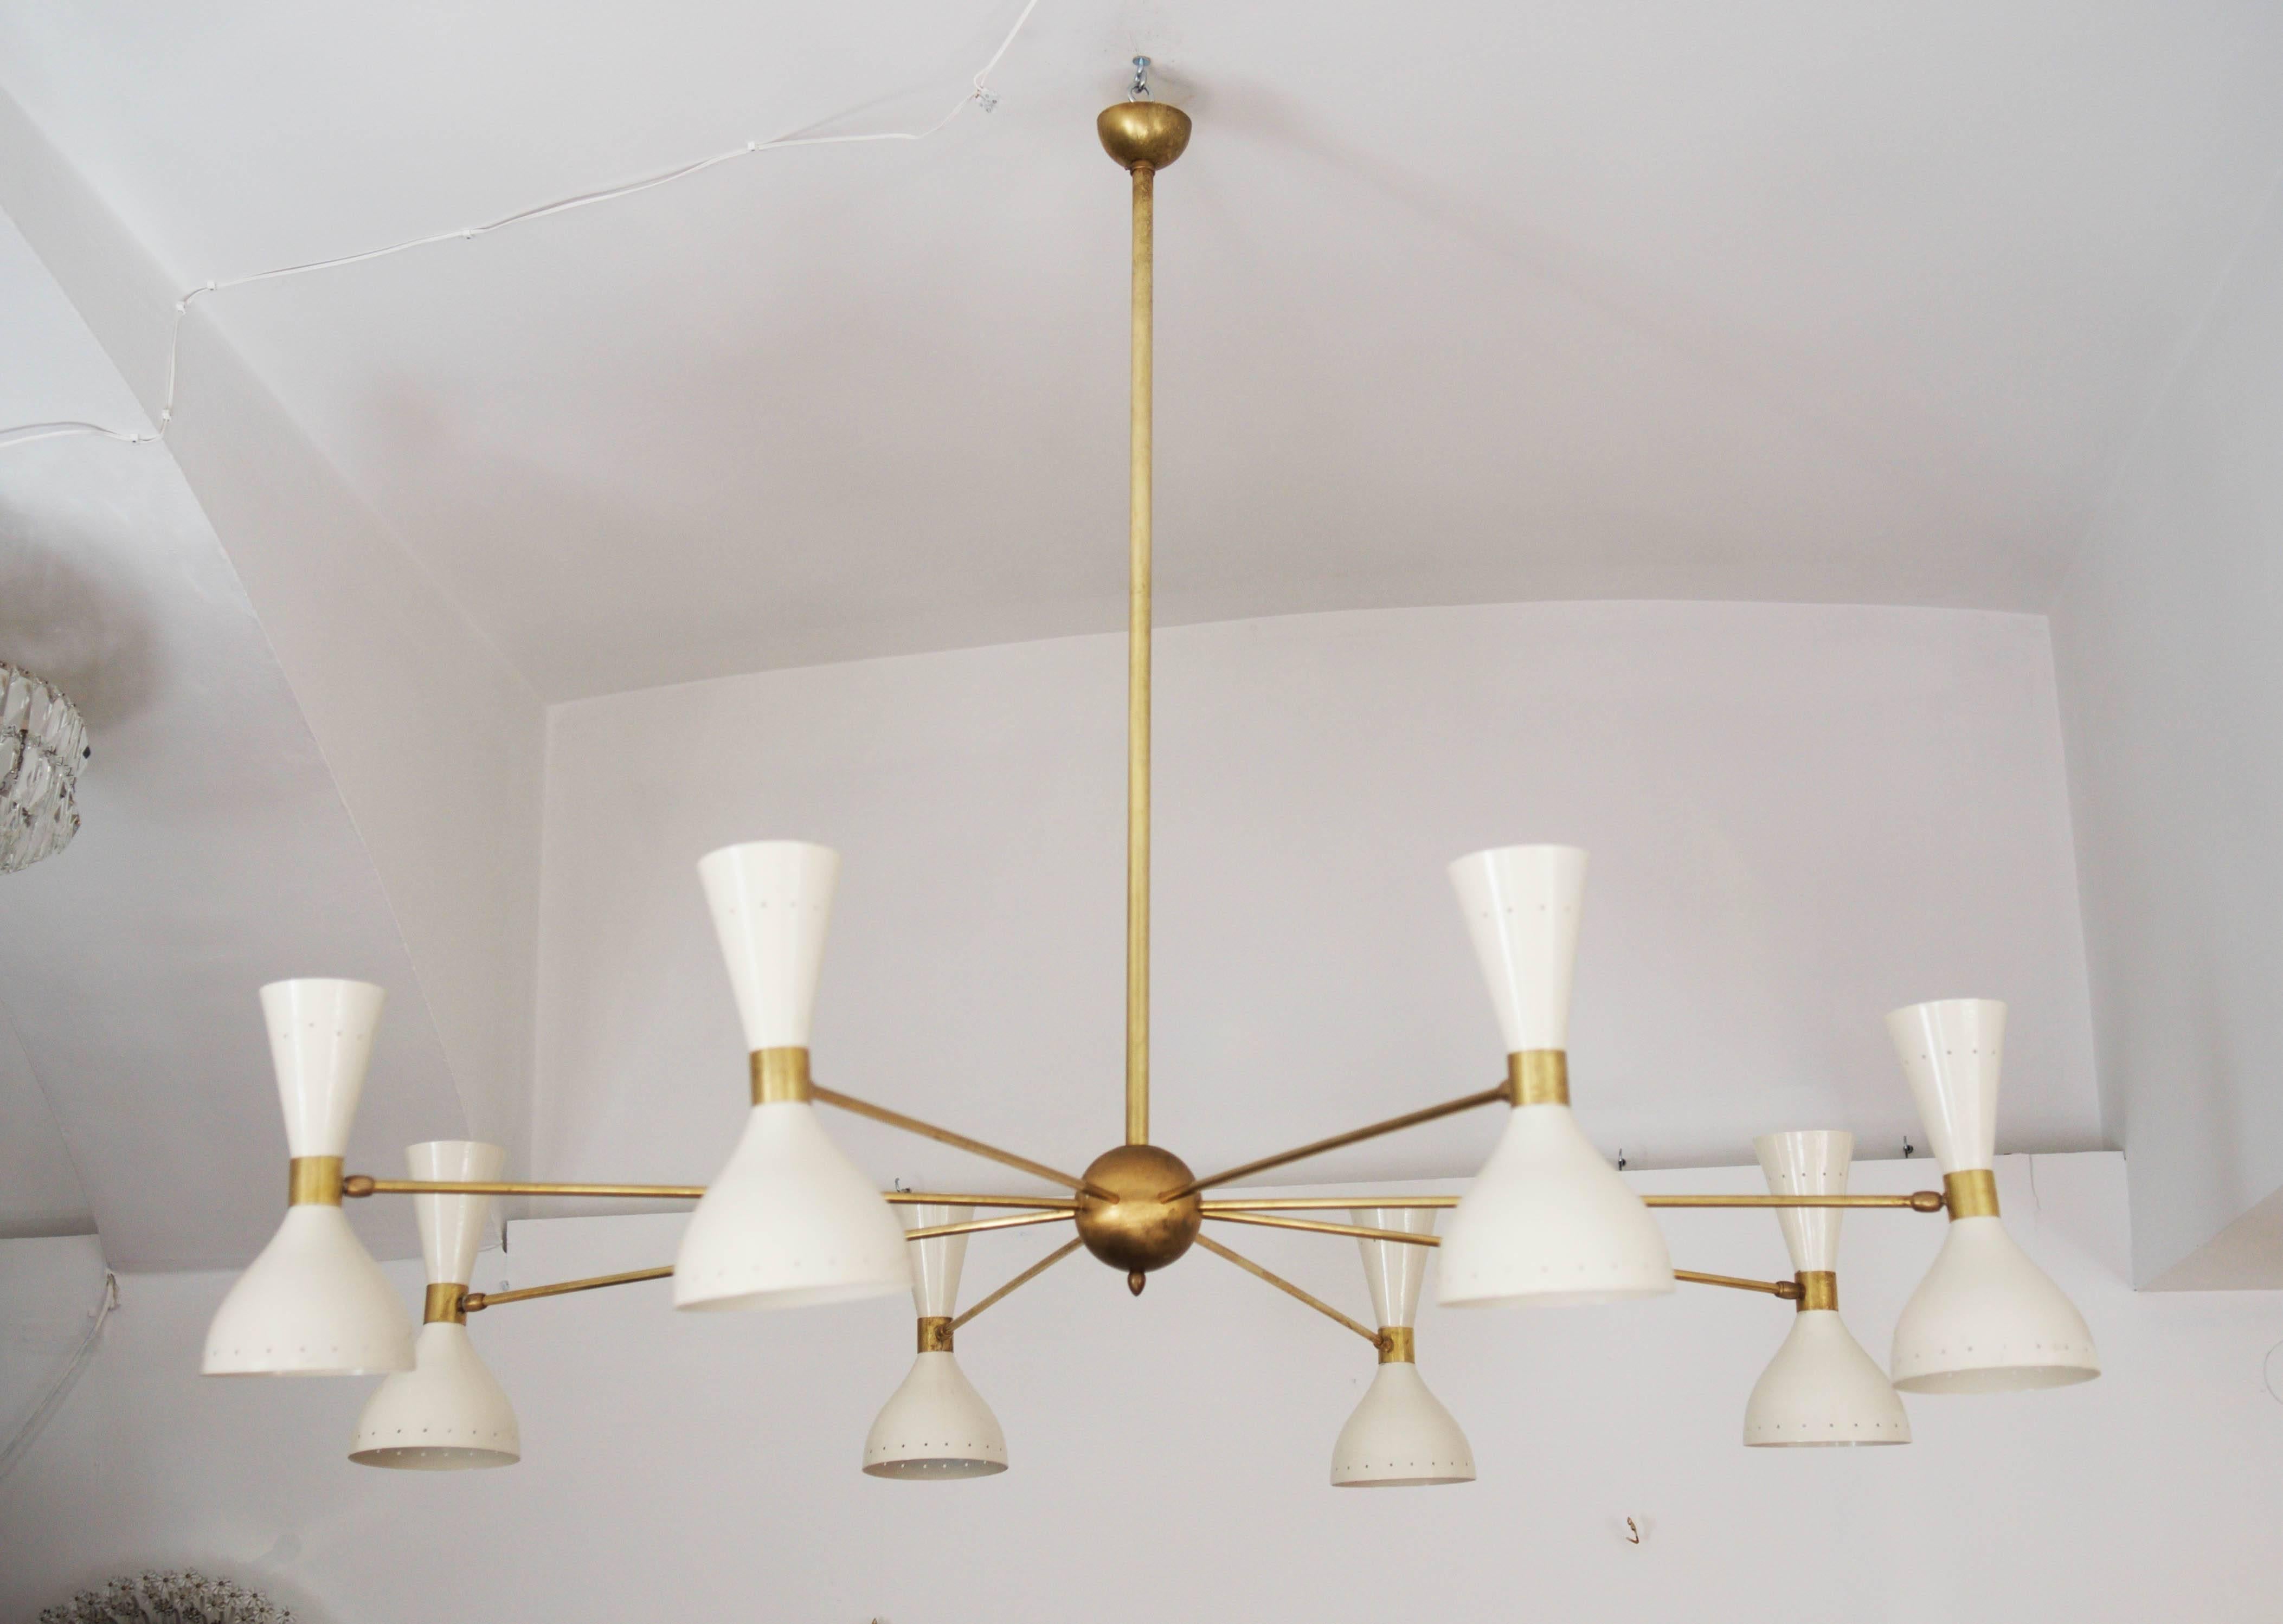 Midcentury huge spider chandelier made in Italy in the style of Stilnovo.
Brass rod and eight arms ending in adjustable white lacquered double cone shades, each with up and down shining lights, fitted with porcelain E14 sockets.
Delivery time